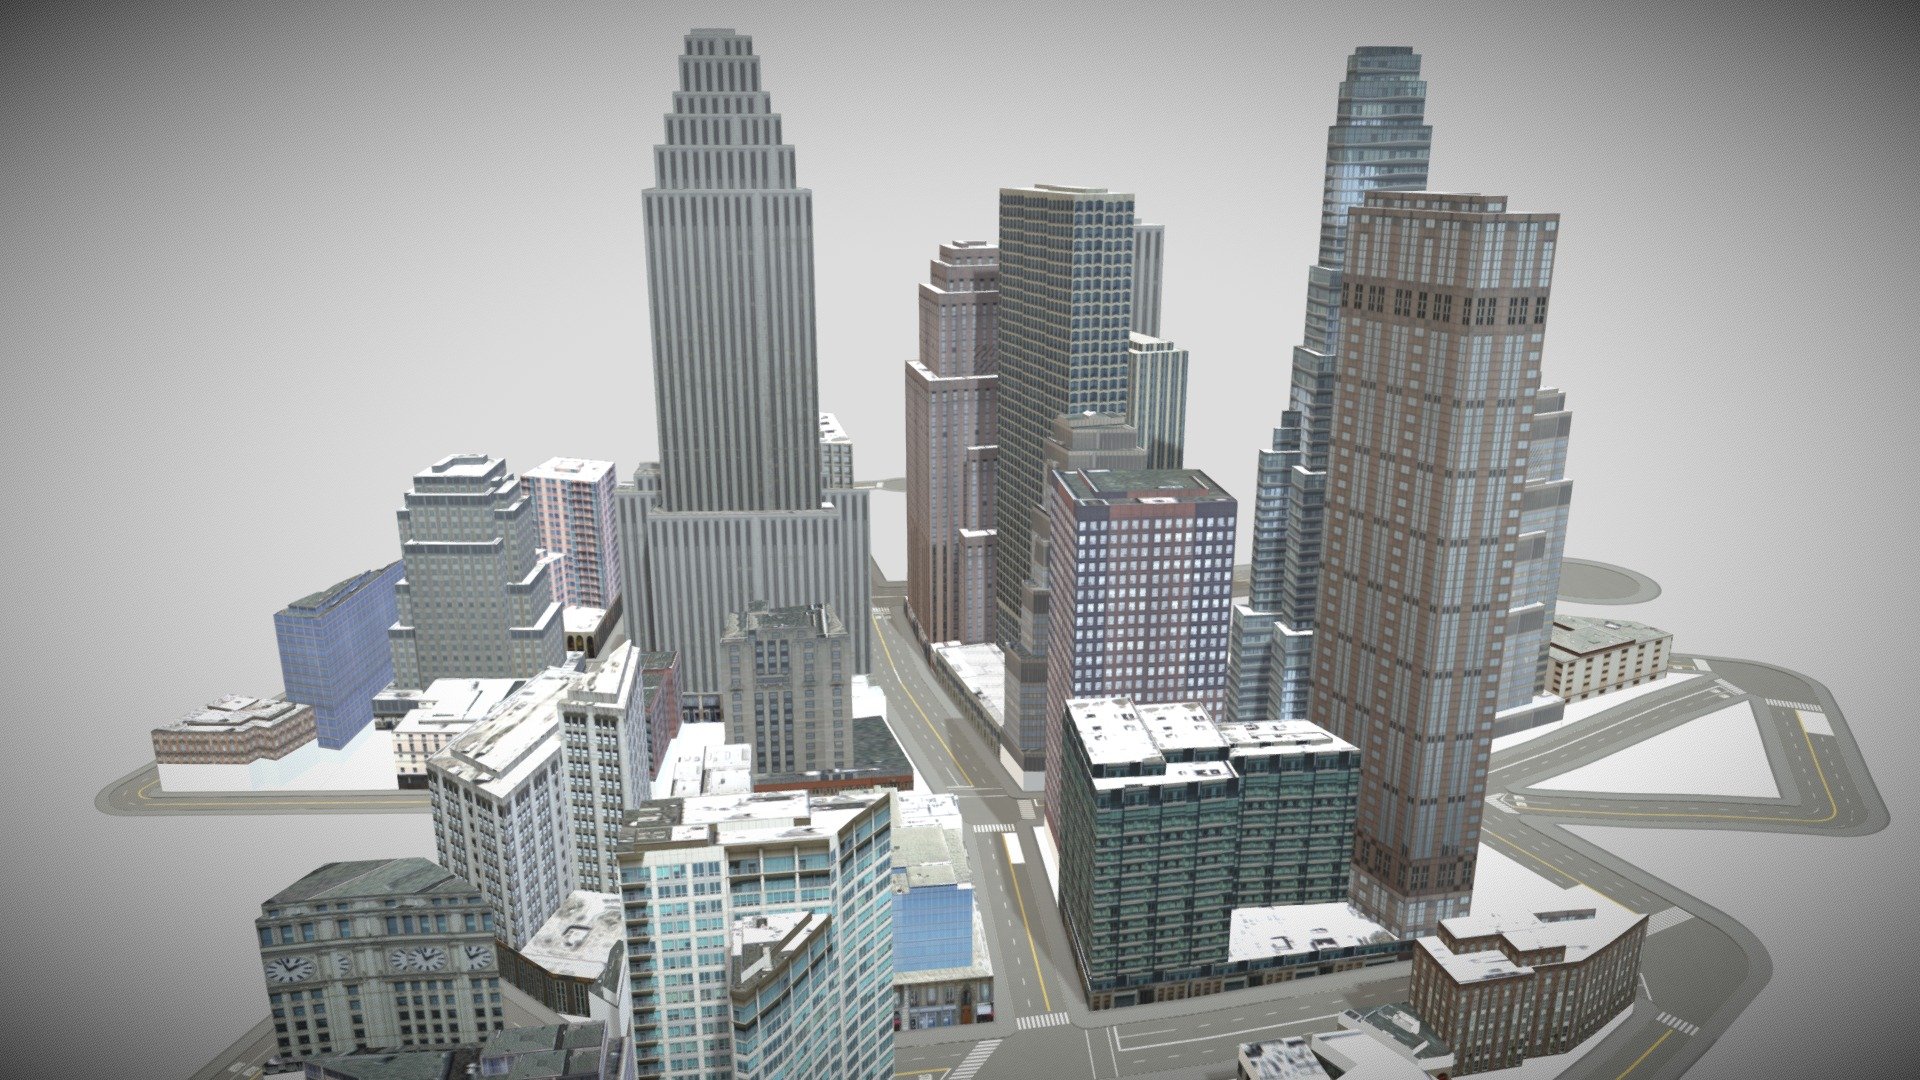 Imaginary (science fiction style) city 1 exported from ArcGIS CityEngine 2021 3d model